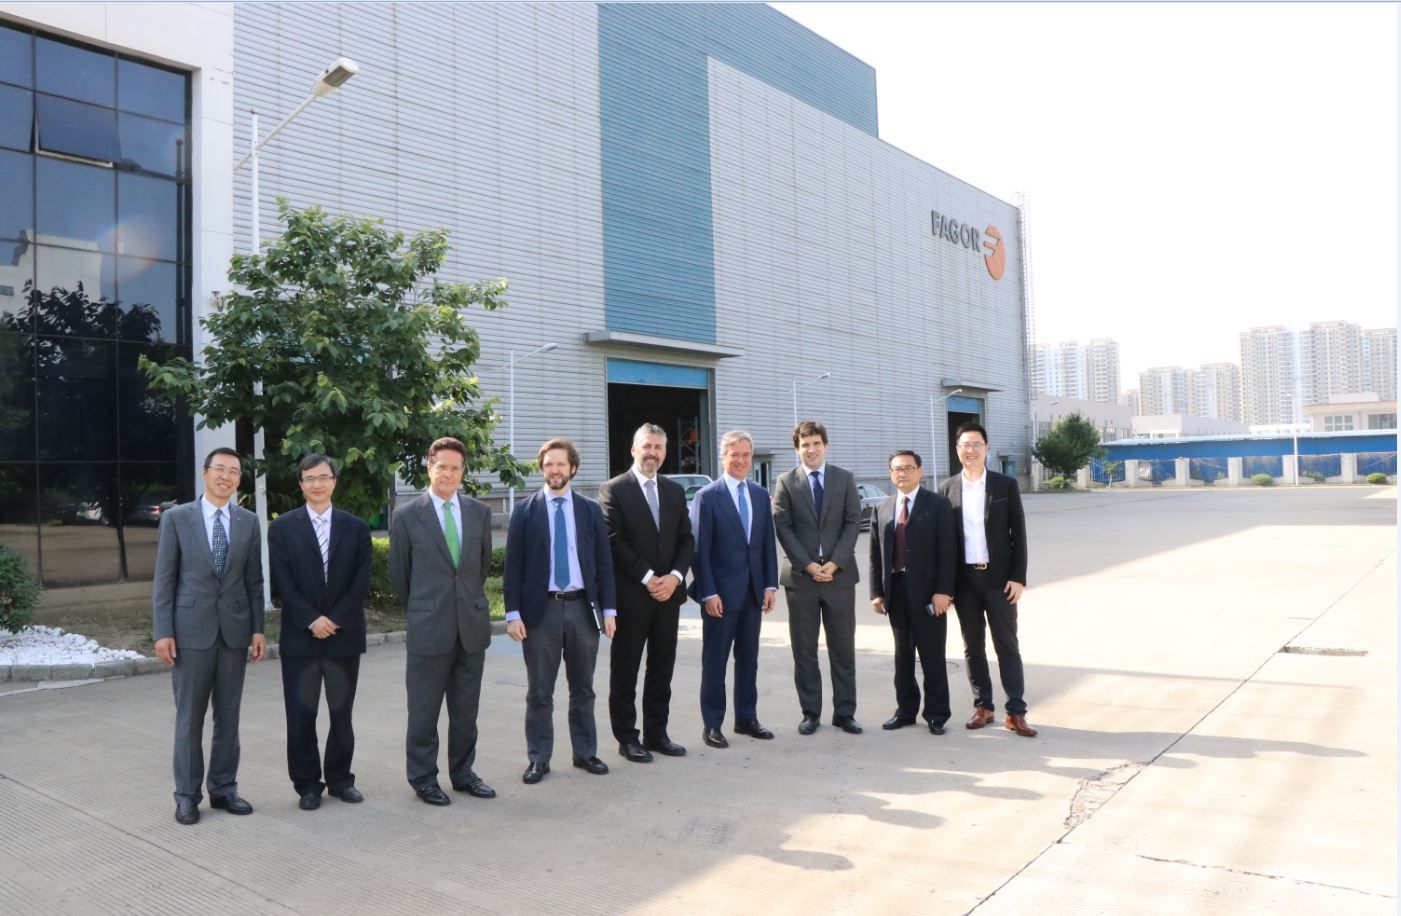 Fagor Arrasate event: THE SPANISH AMBASSADOR TO CHINA VISITED THE FAGOR ARRASATE PLANT IN KUNSHAN